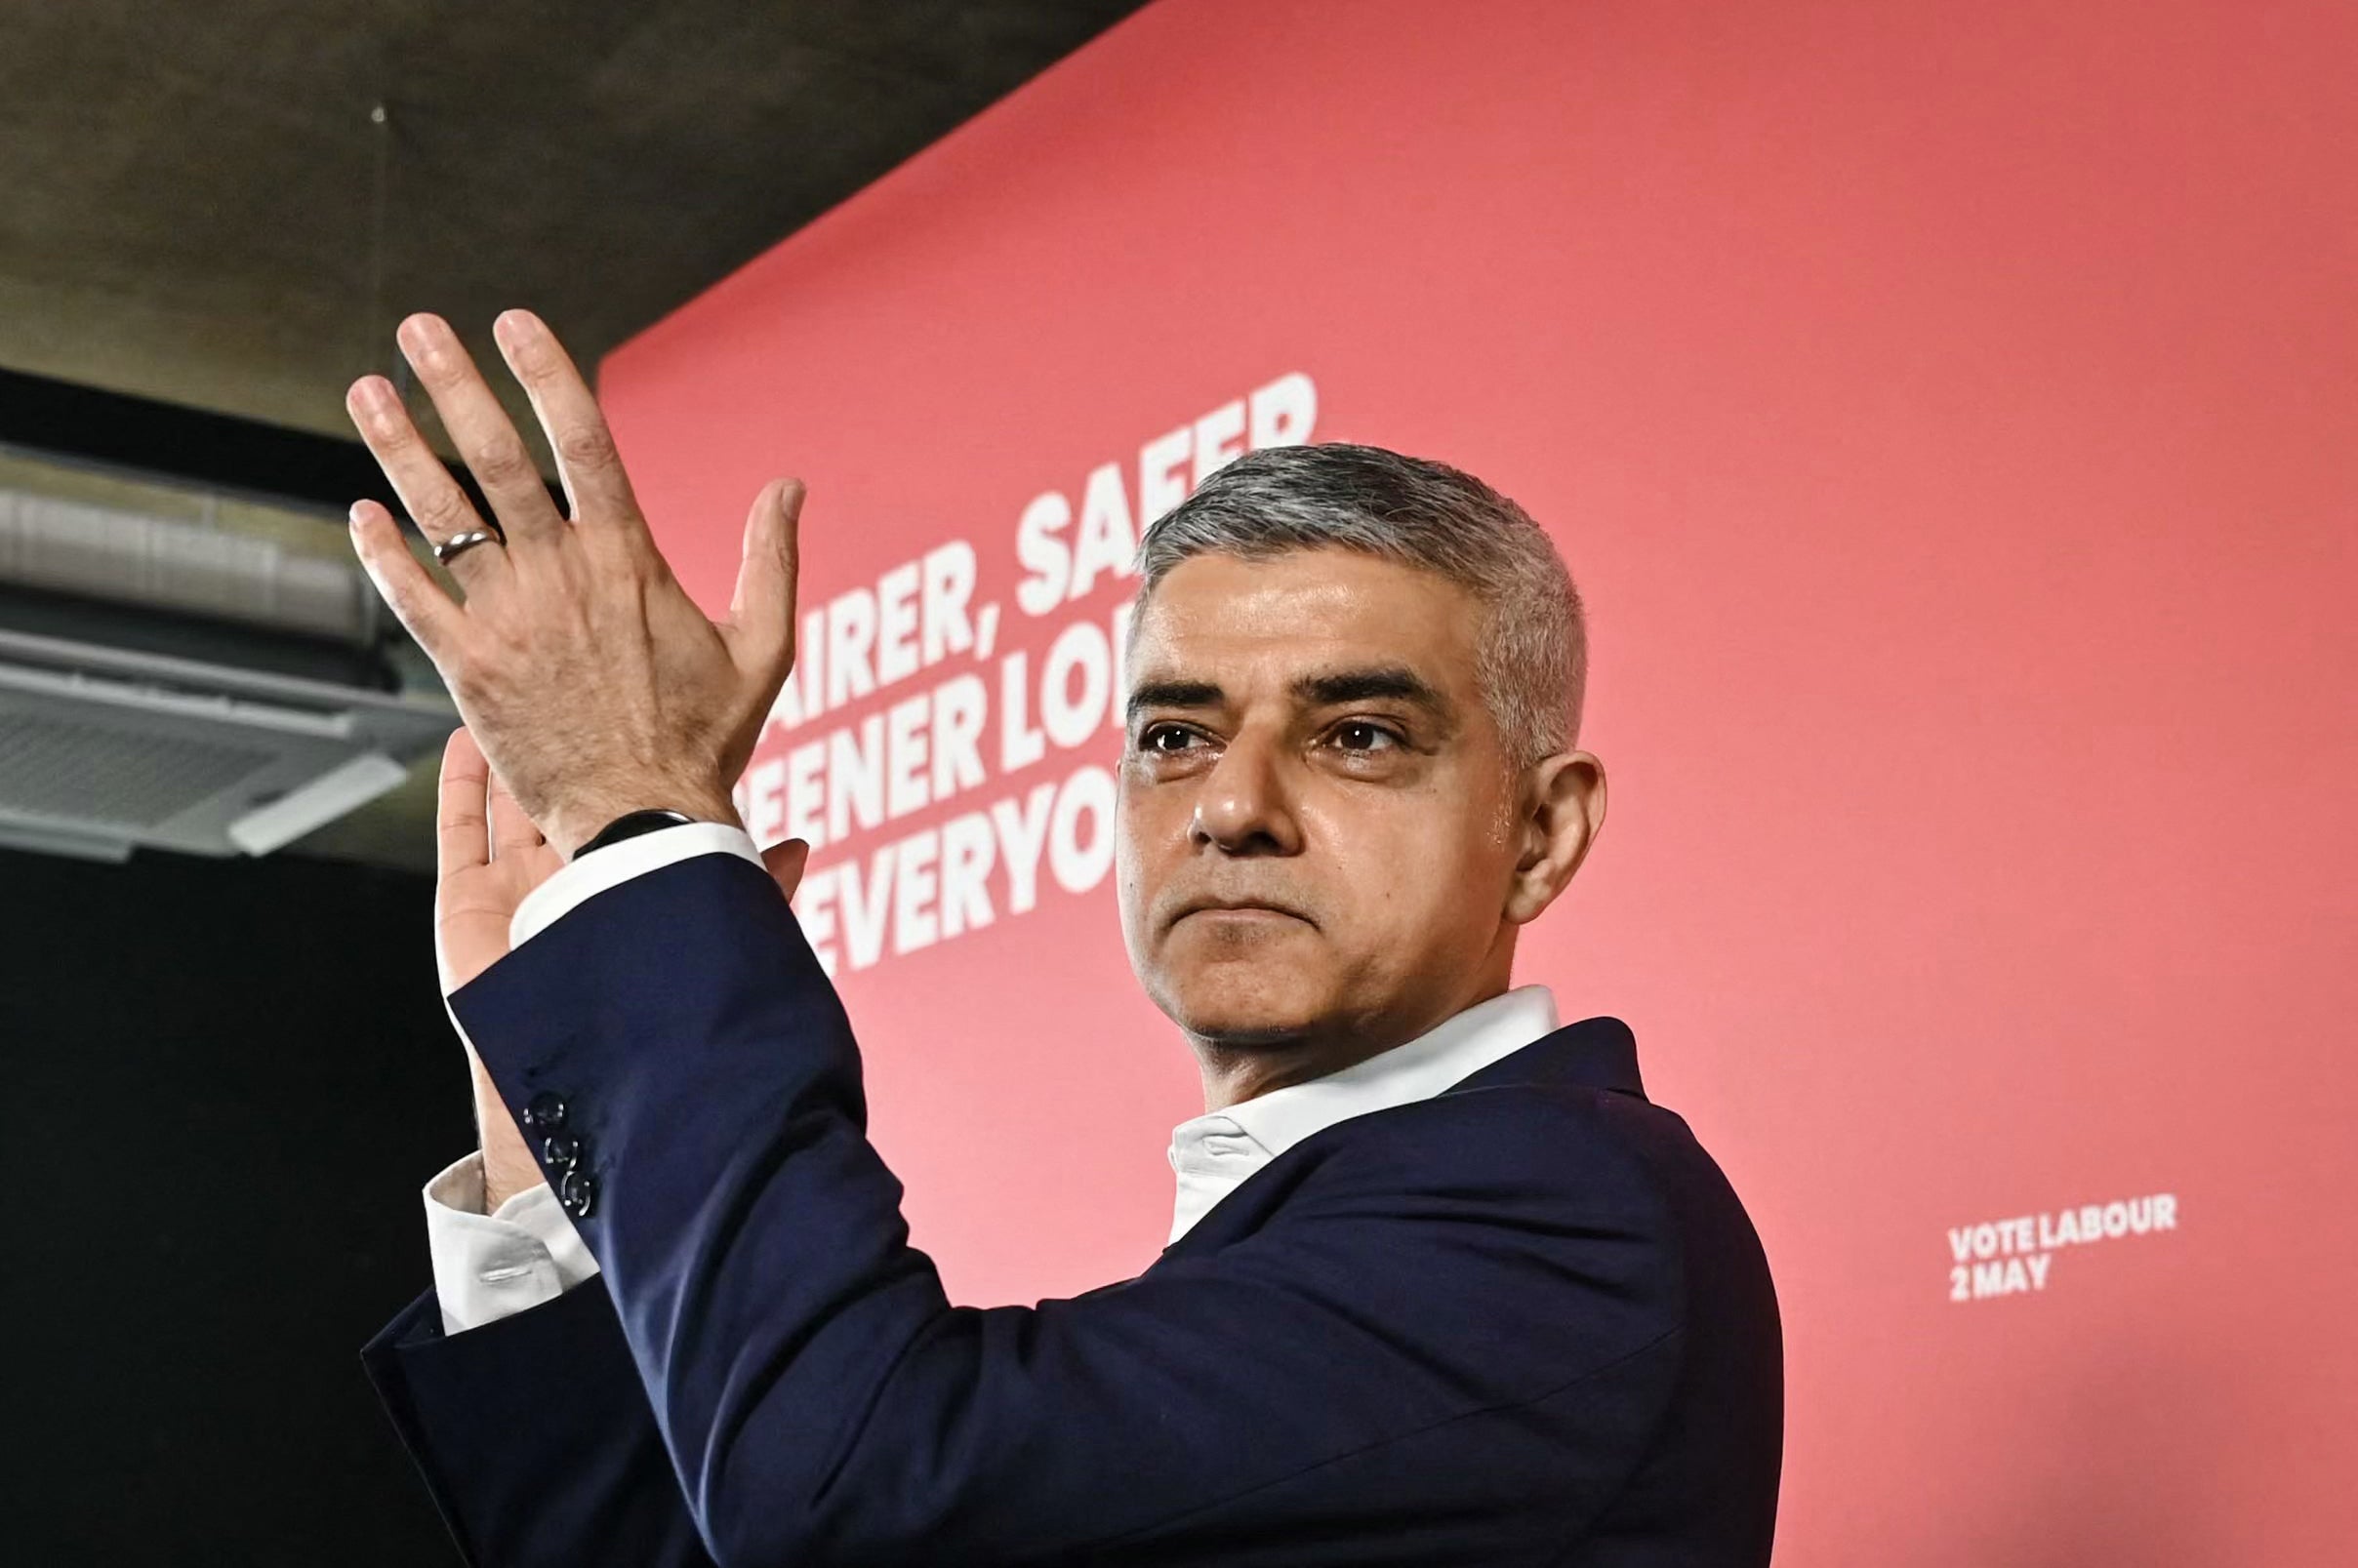 Sadiq Khan has been accused of failing to do enough on the big issues during his eight years as mayor